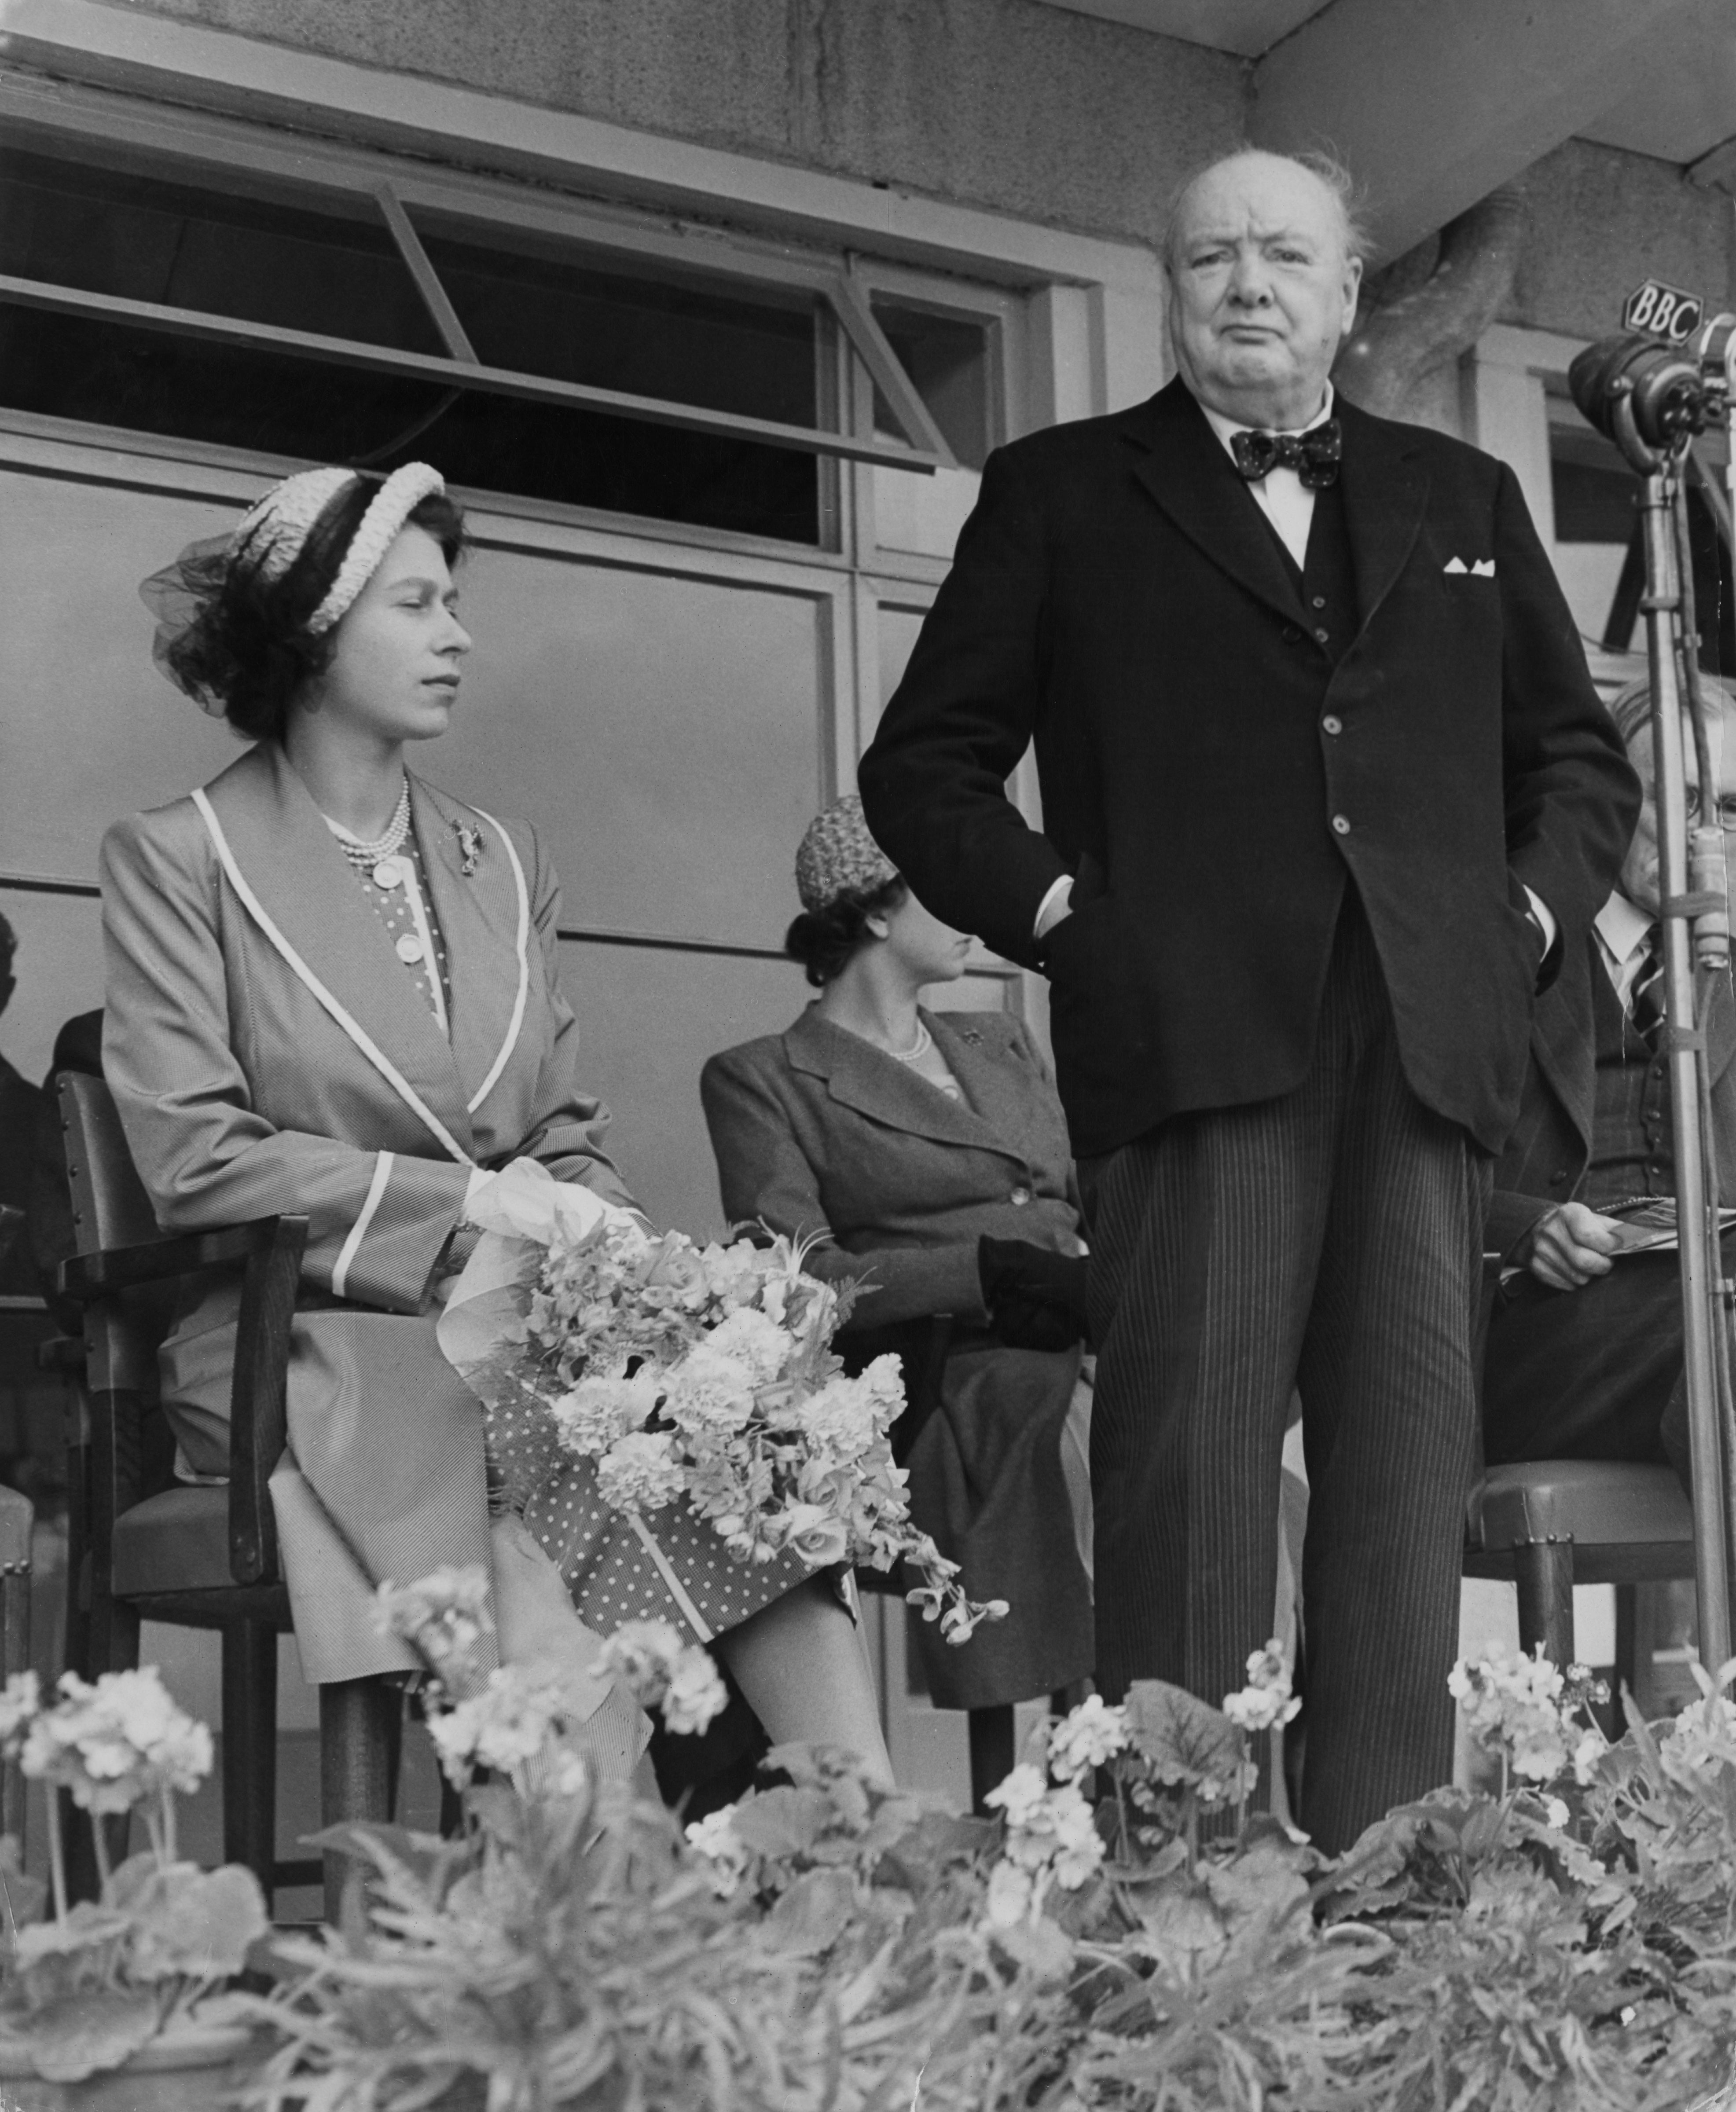 Winston Churchill and the Queen at the opening of the International Youth Centre at Chigwell, Essex, 12 July 1951